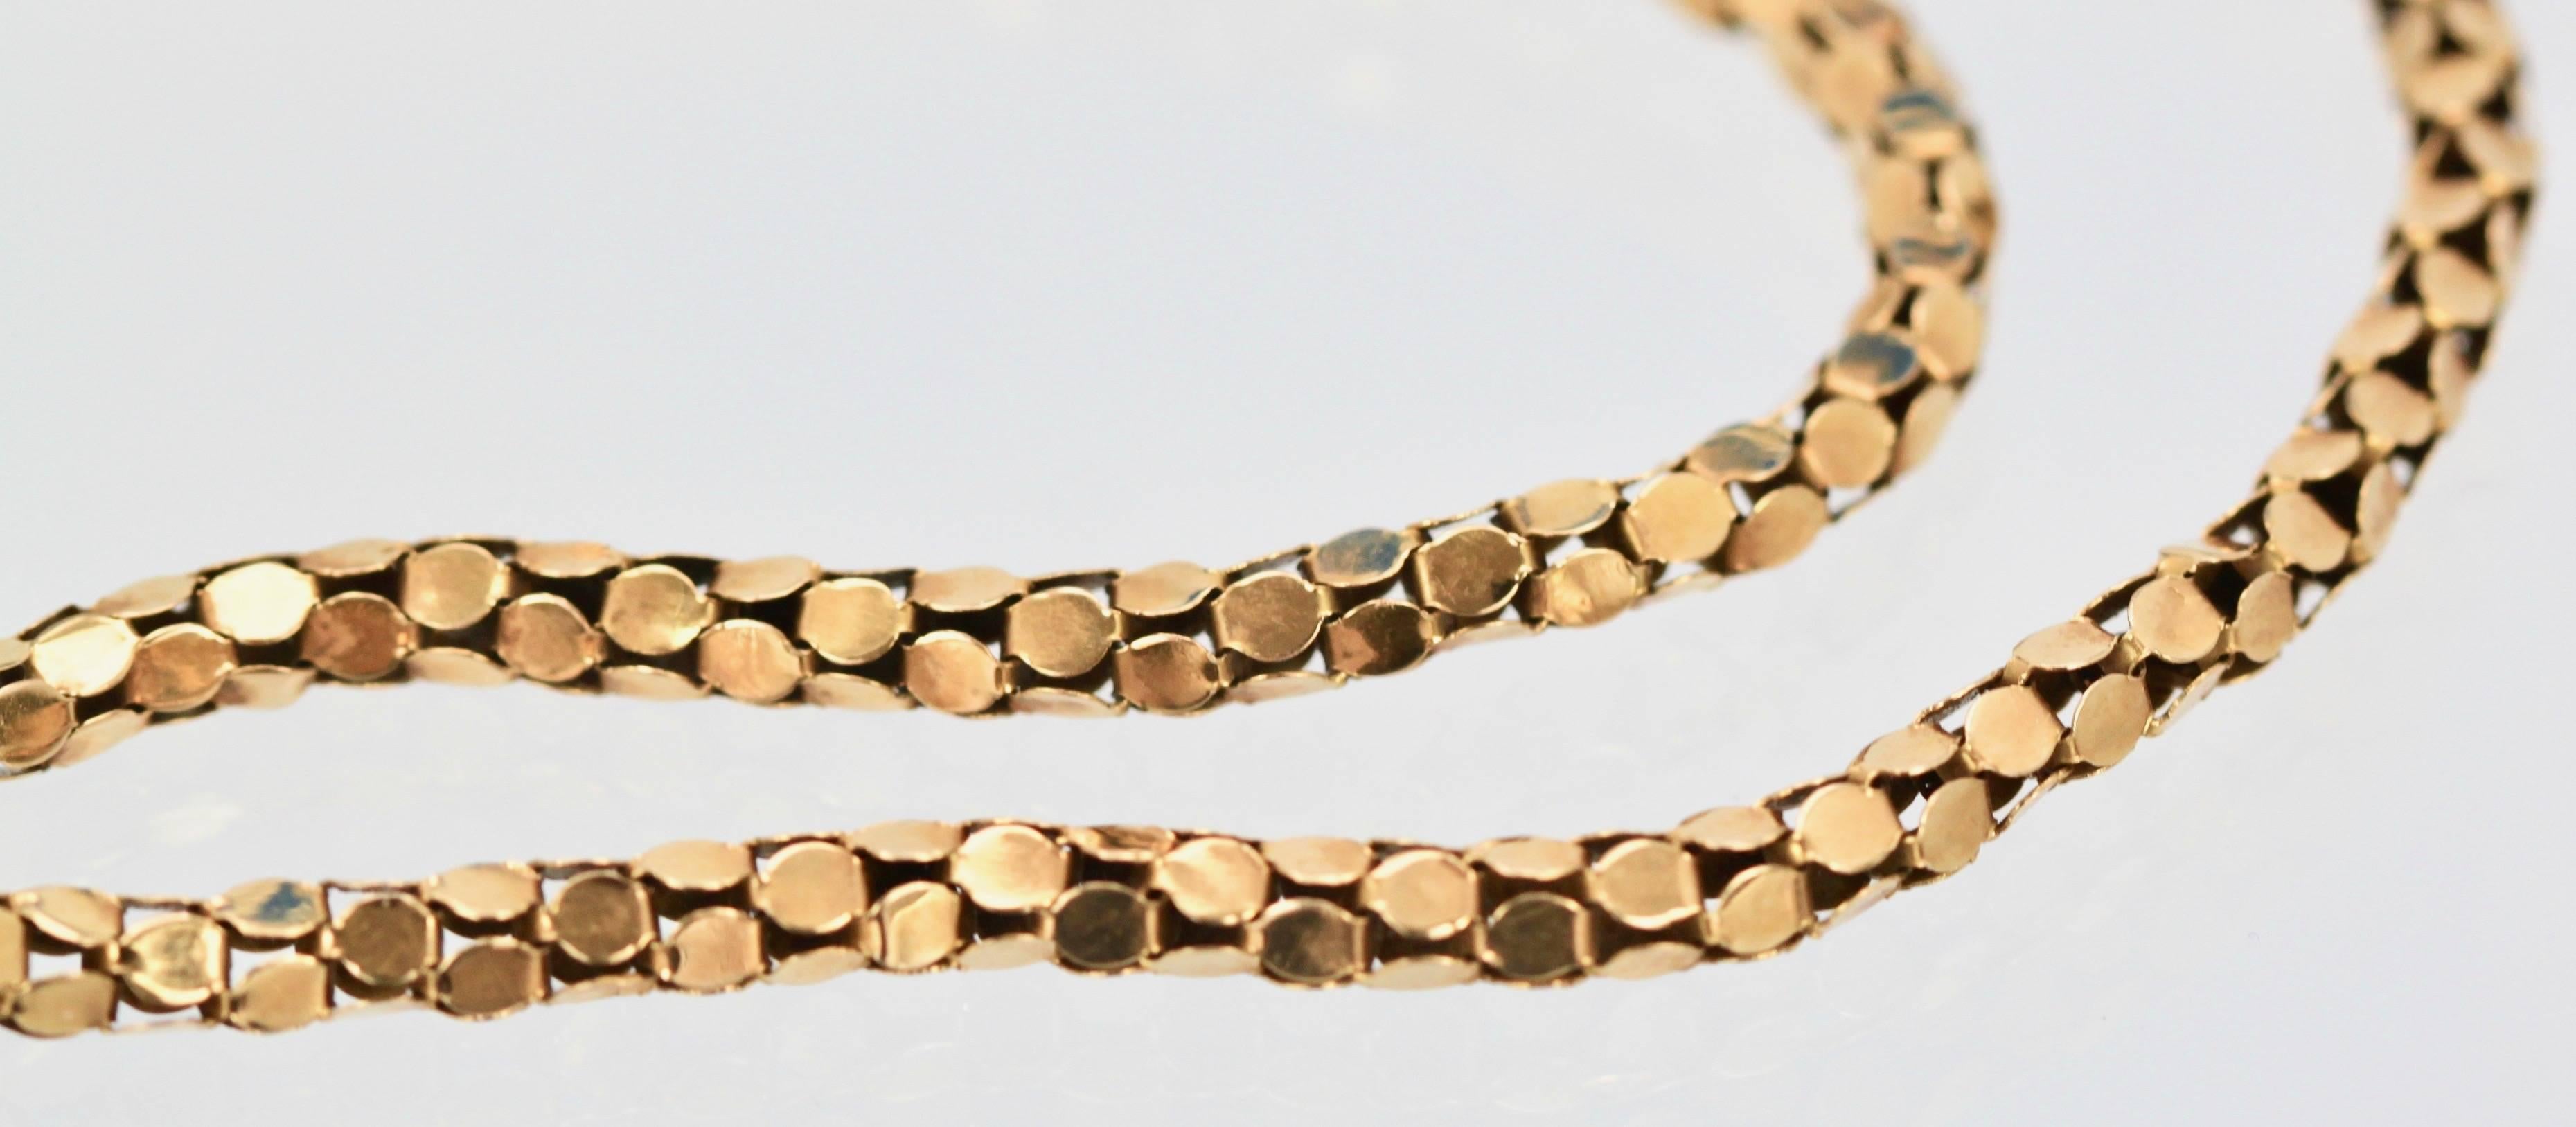 serpent necklace gold